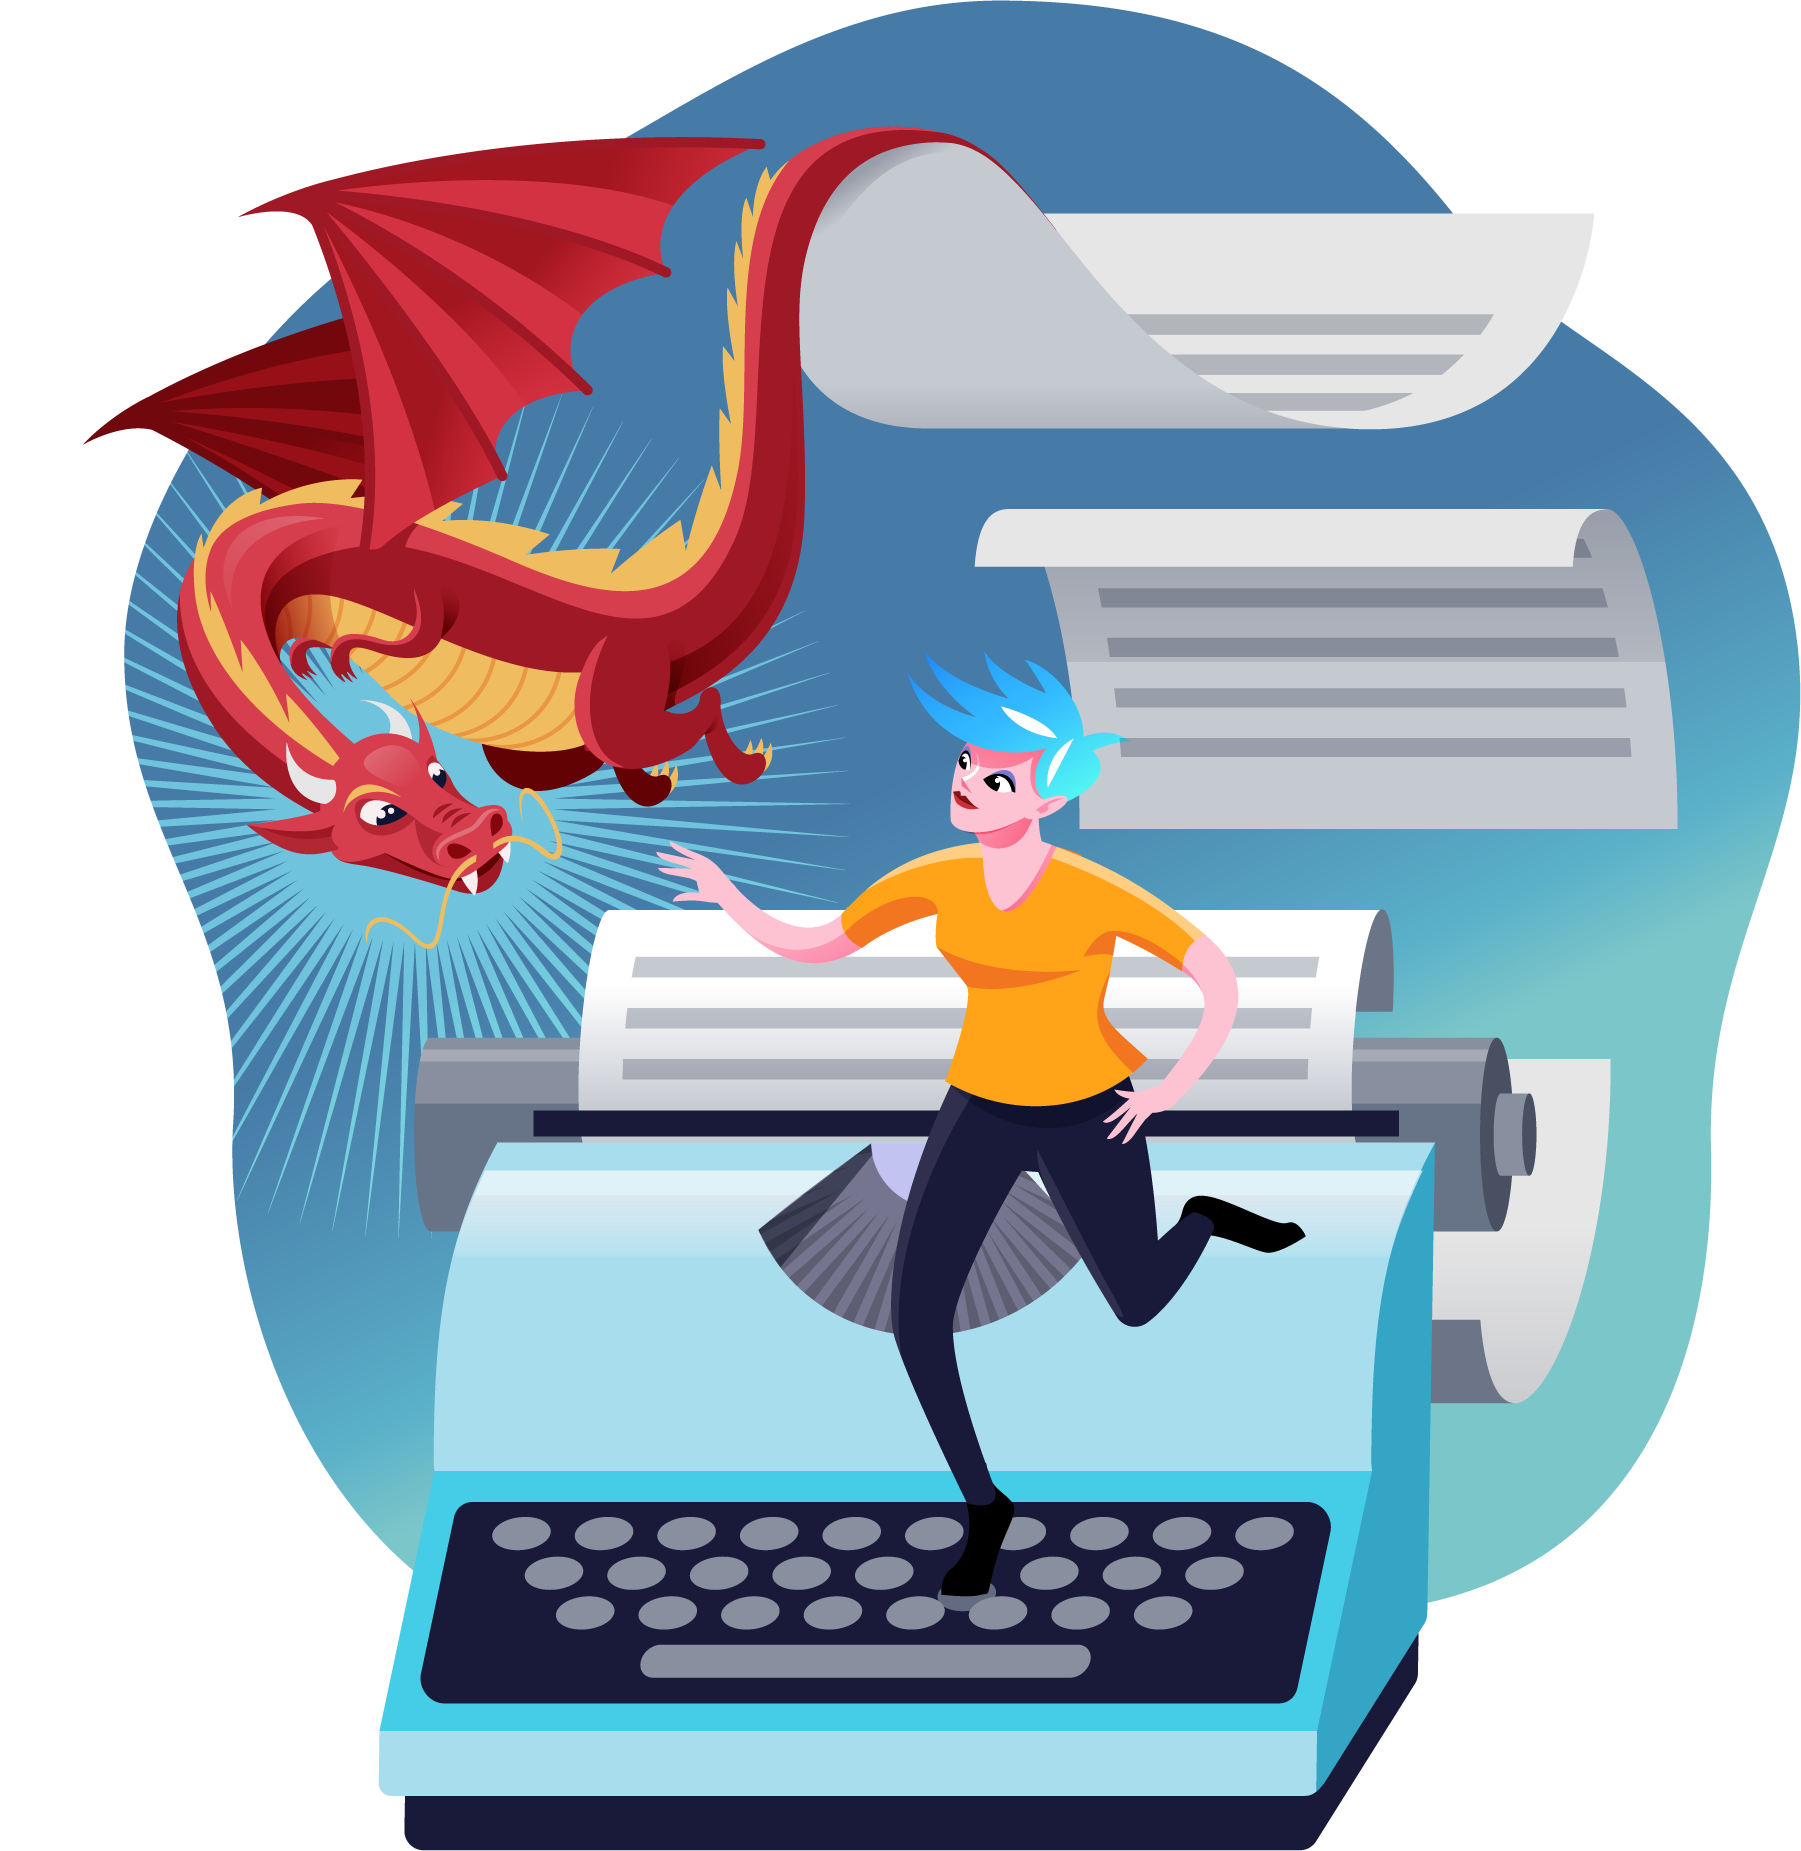 Game Writing illustration - articy avatar standing on a typewriter key looking at red dragon coming to life from story